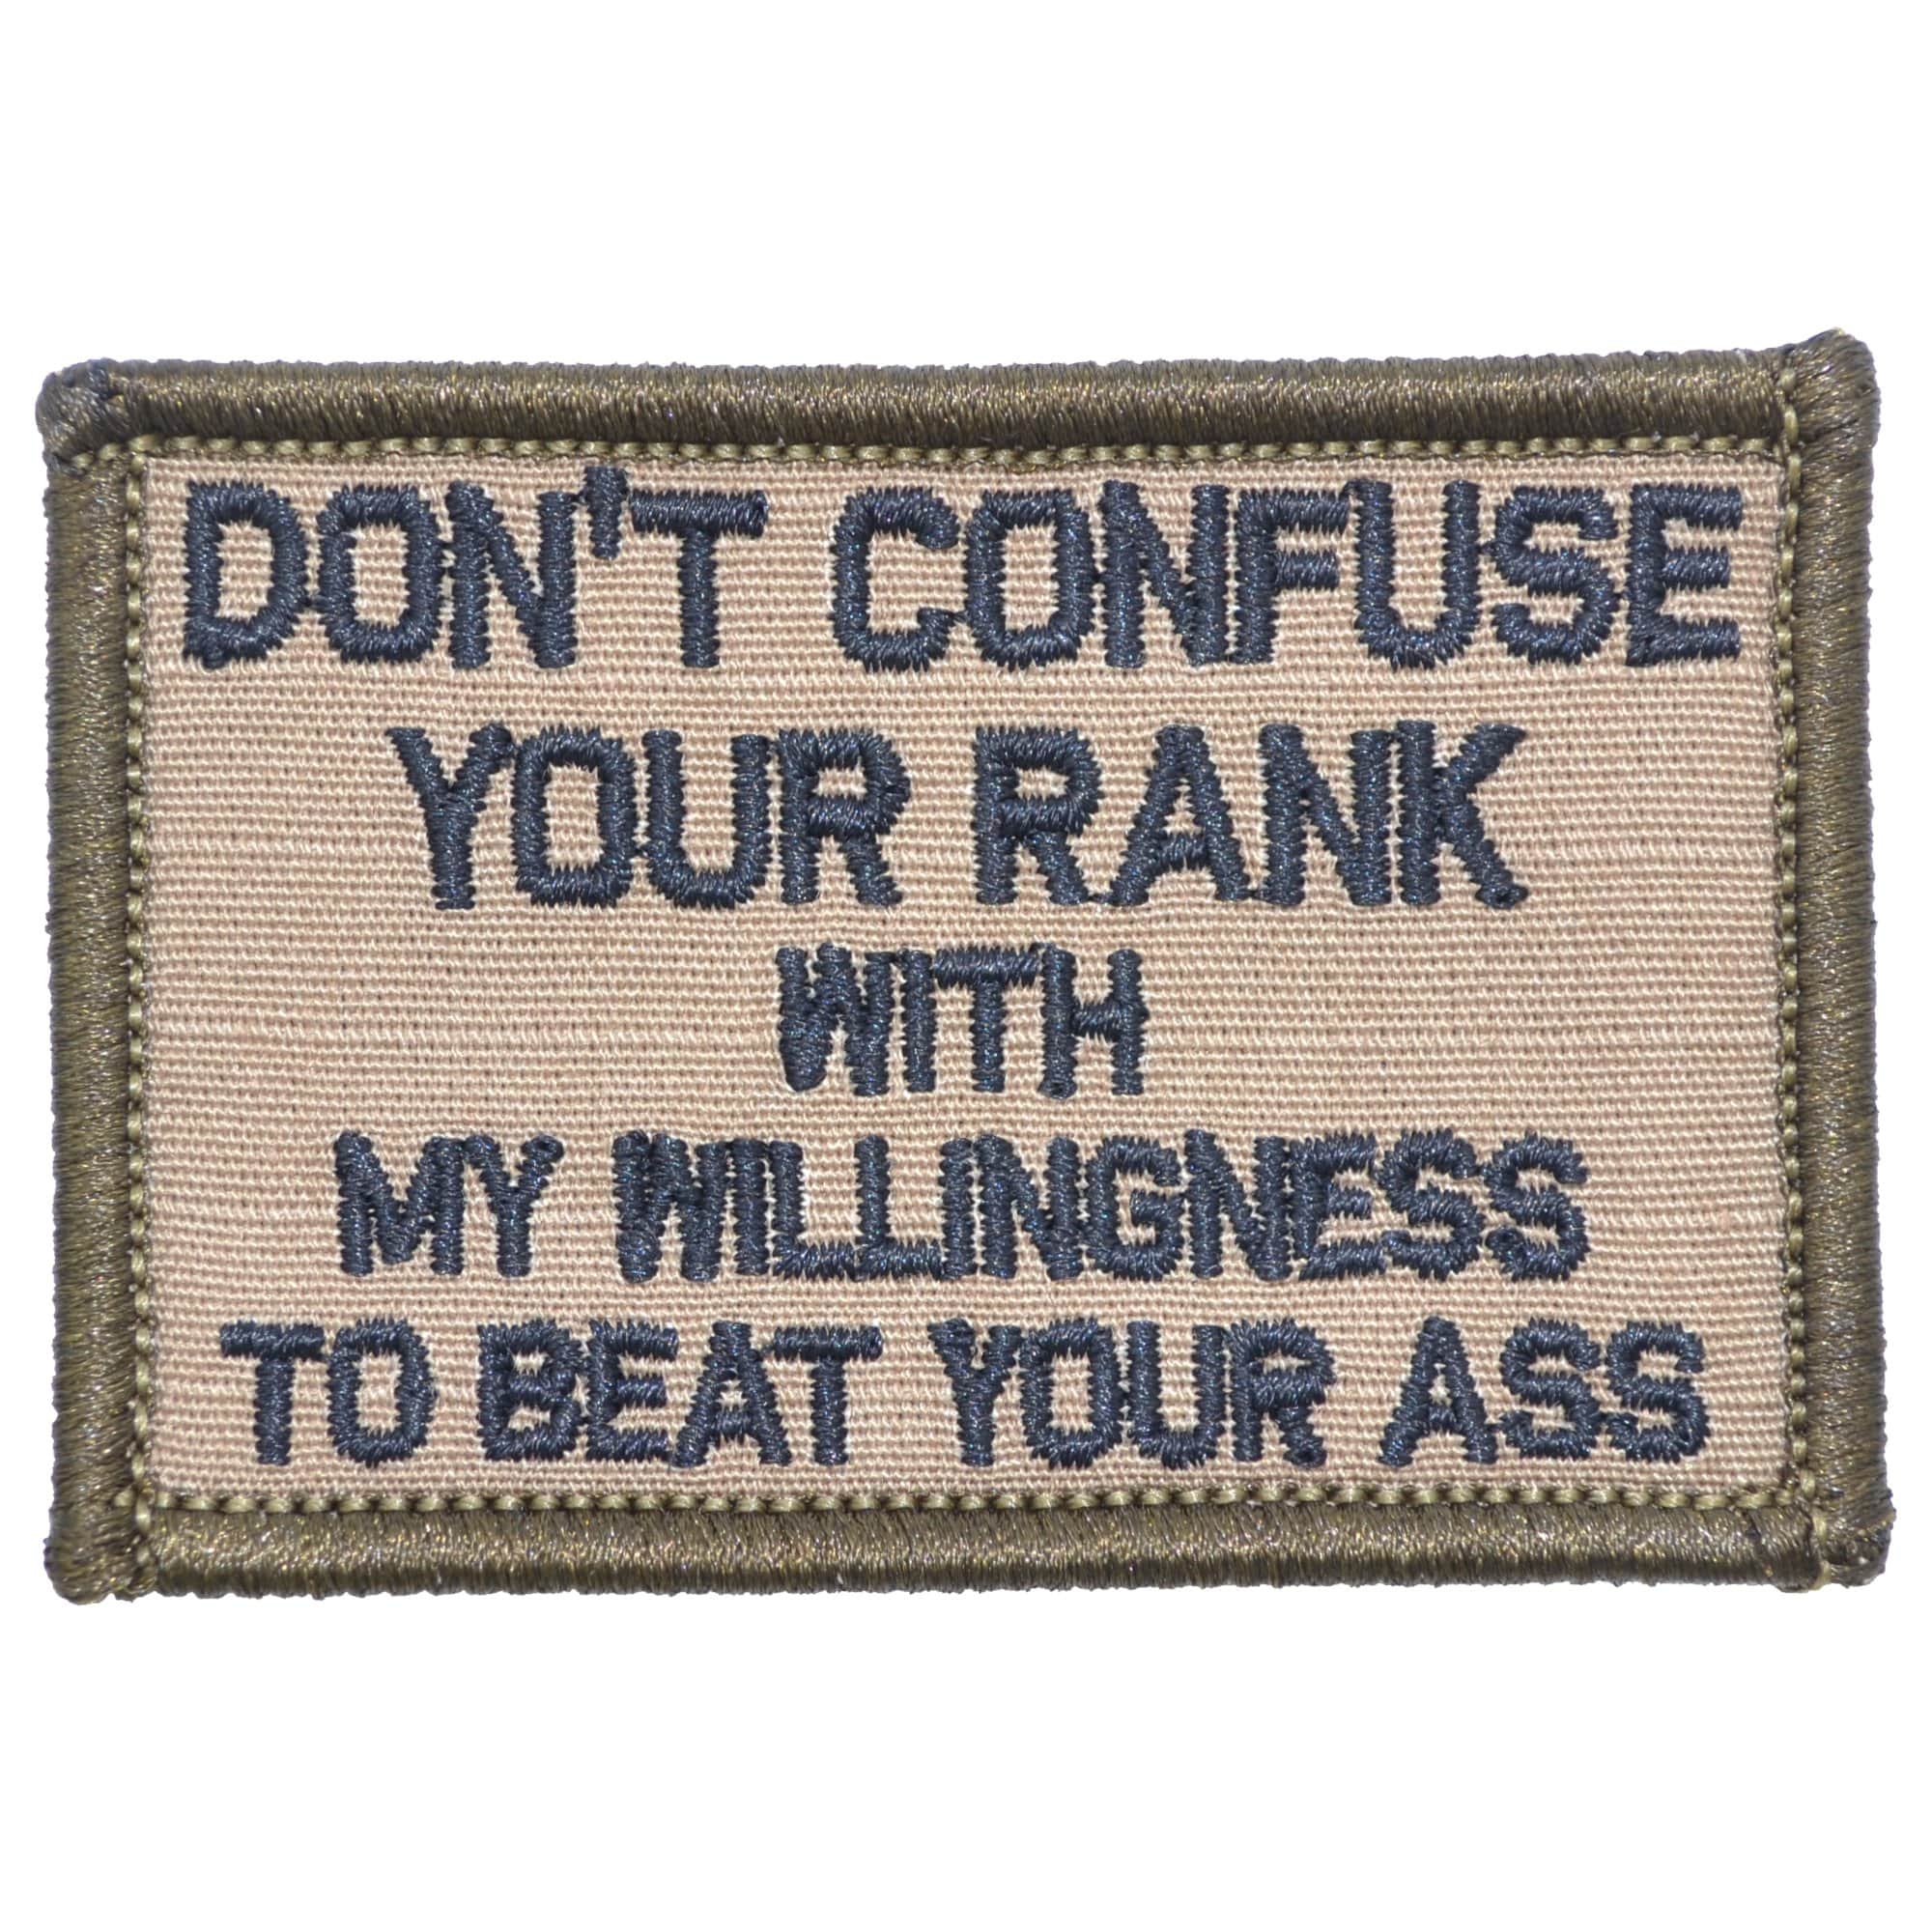 Tactical Gear Junkie Patches Coyote Brown w/ Black Don't Confuse Your Rank With My Willingness To Beat Your Ass - 2x3 Patch